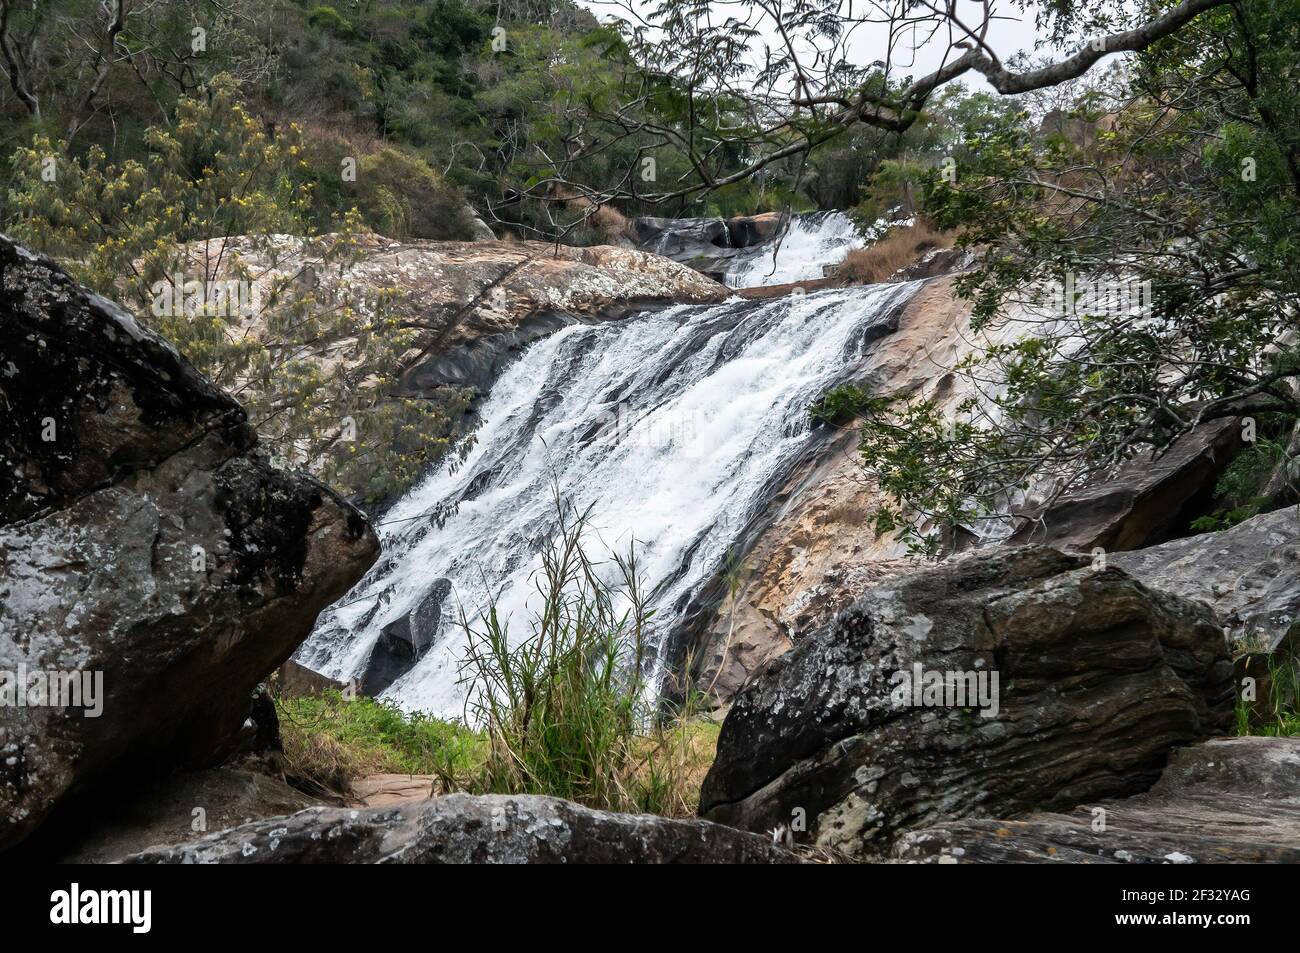 Foaming waters from Pimenta waterfall dripping over rock formations of Sea Ridge (Serra do Mar region) forest, Cunha countryside. Stock Photo